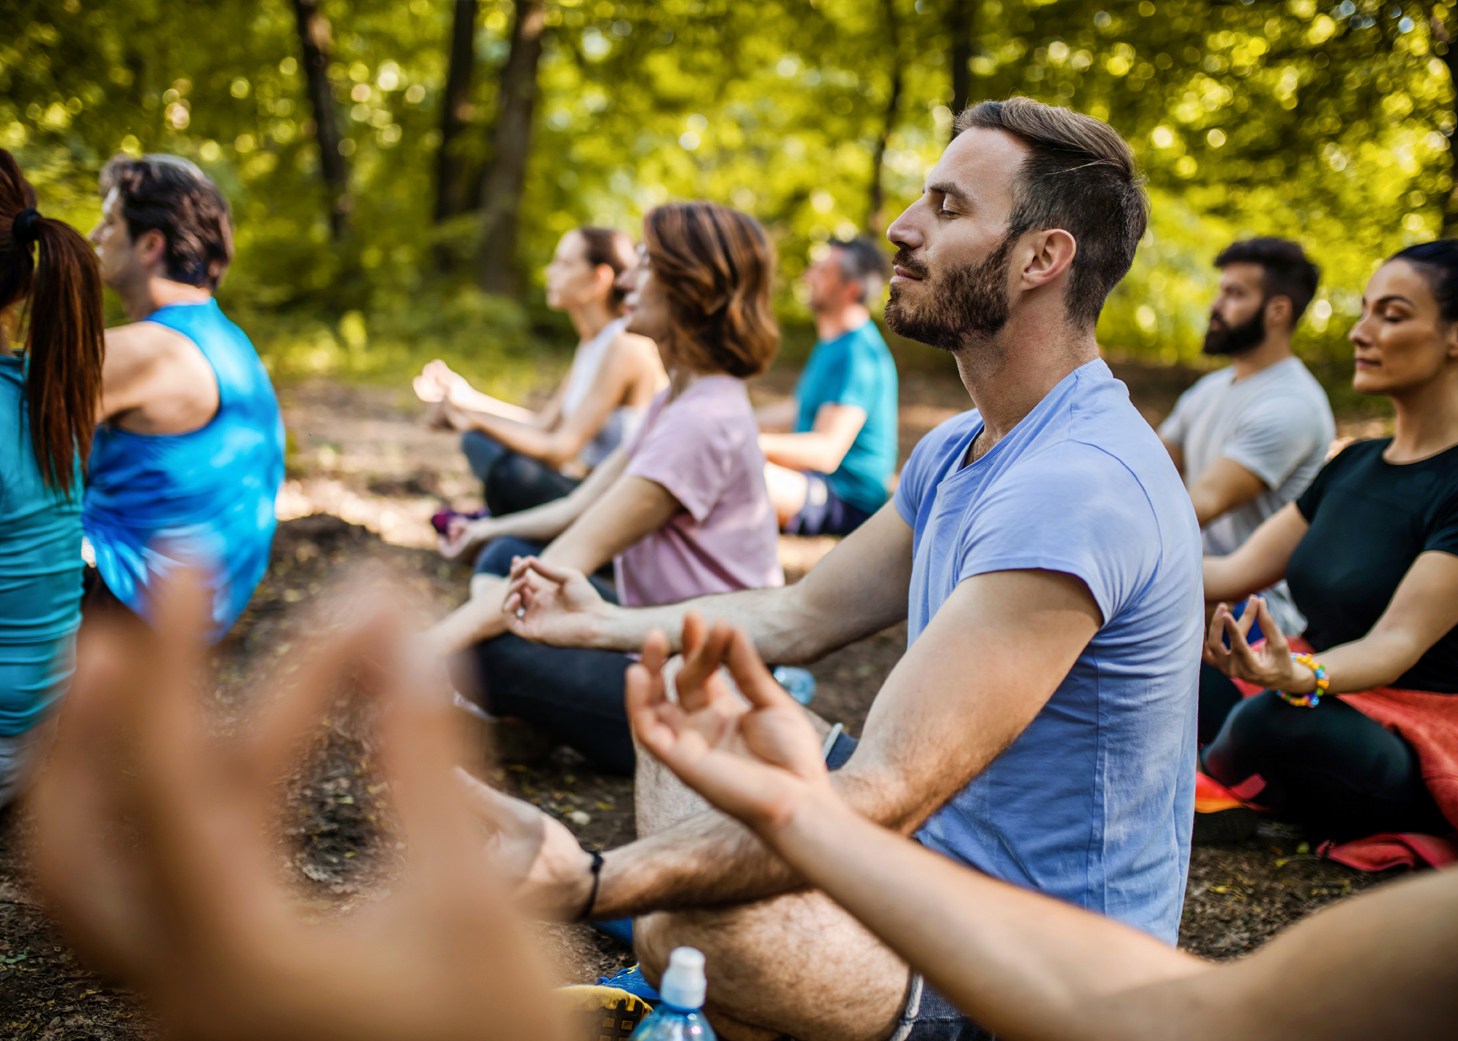 Group of people doing yoga in the woods.